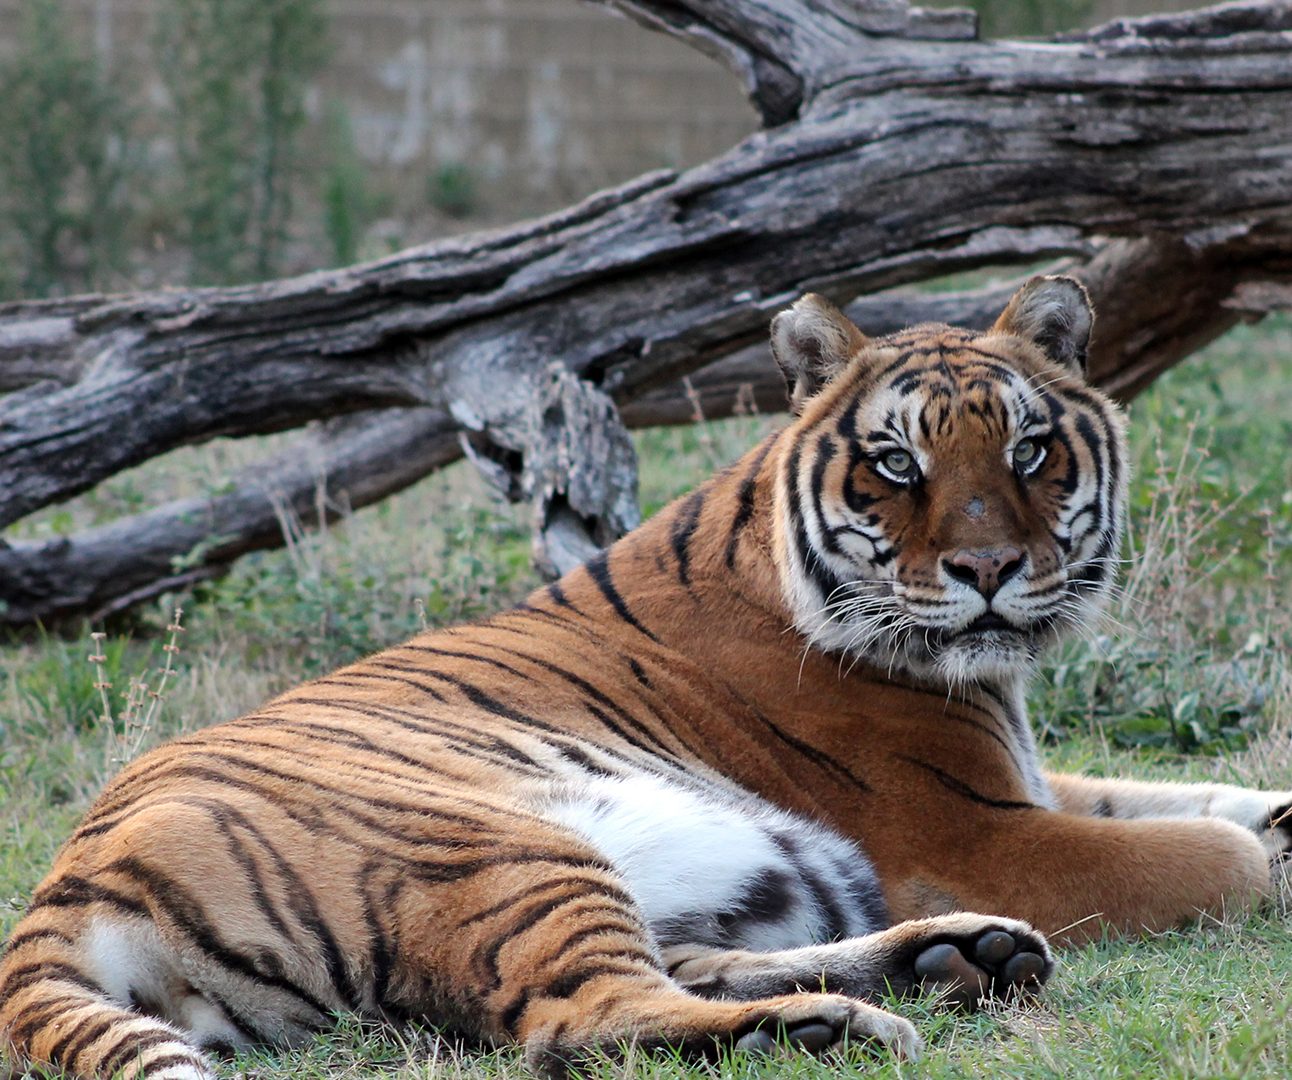 A tiger is lying on the grass with a fallen tree behind him